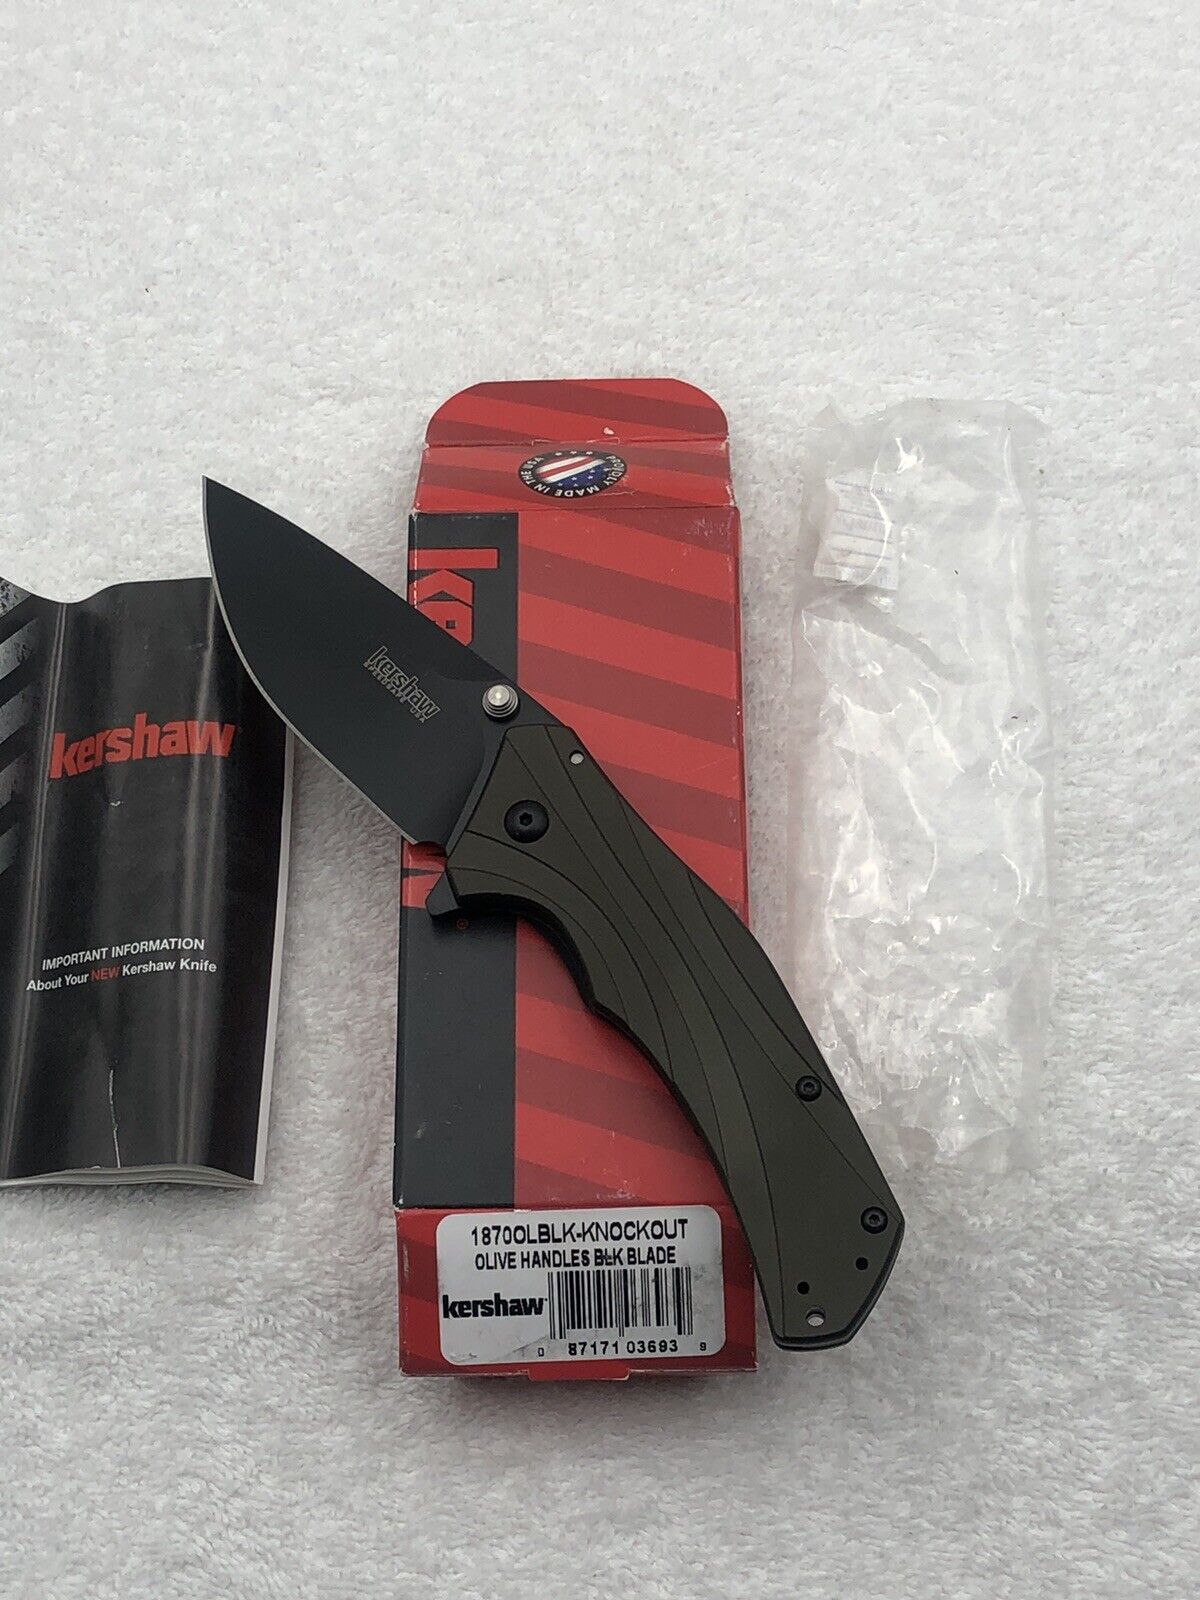 Kershaw 1870 OLBLK Knockout Assist Open Knife NIB Made In USA Discontinued